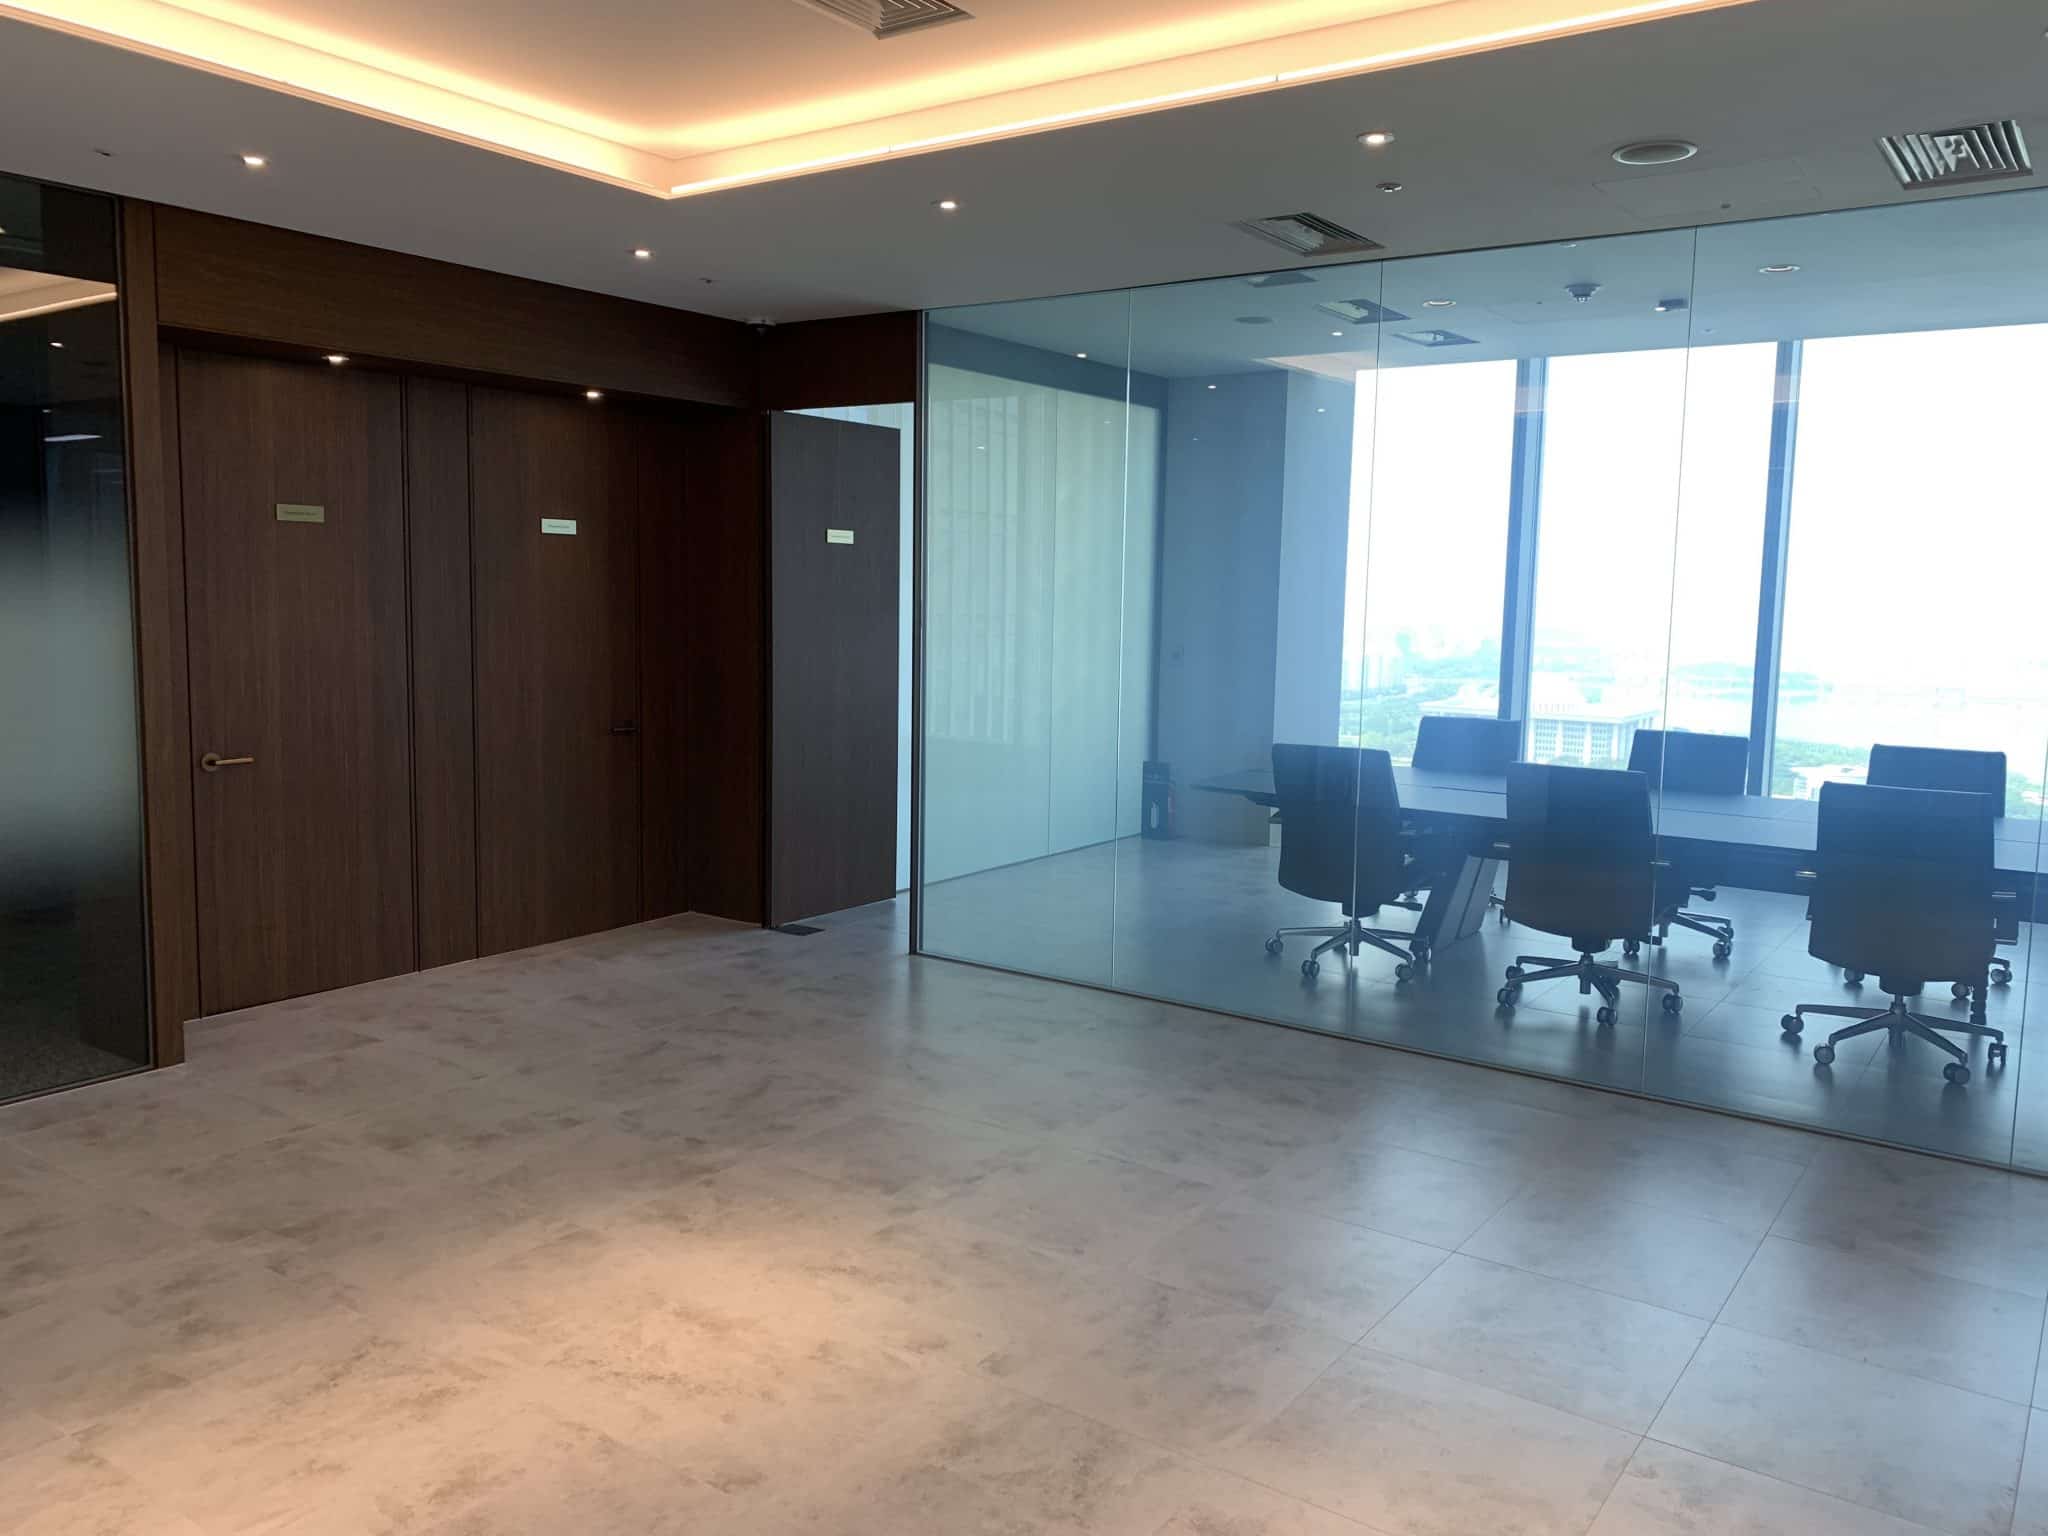 Office building with glass walls in the conference room